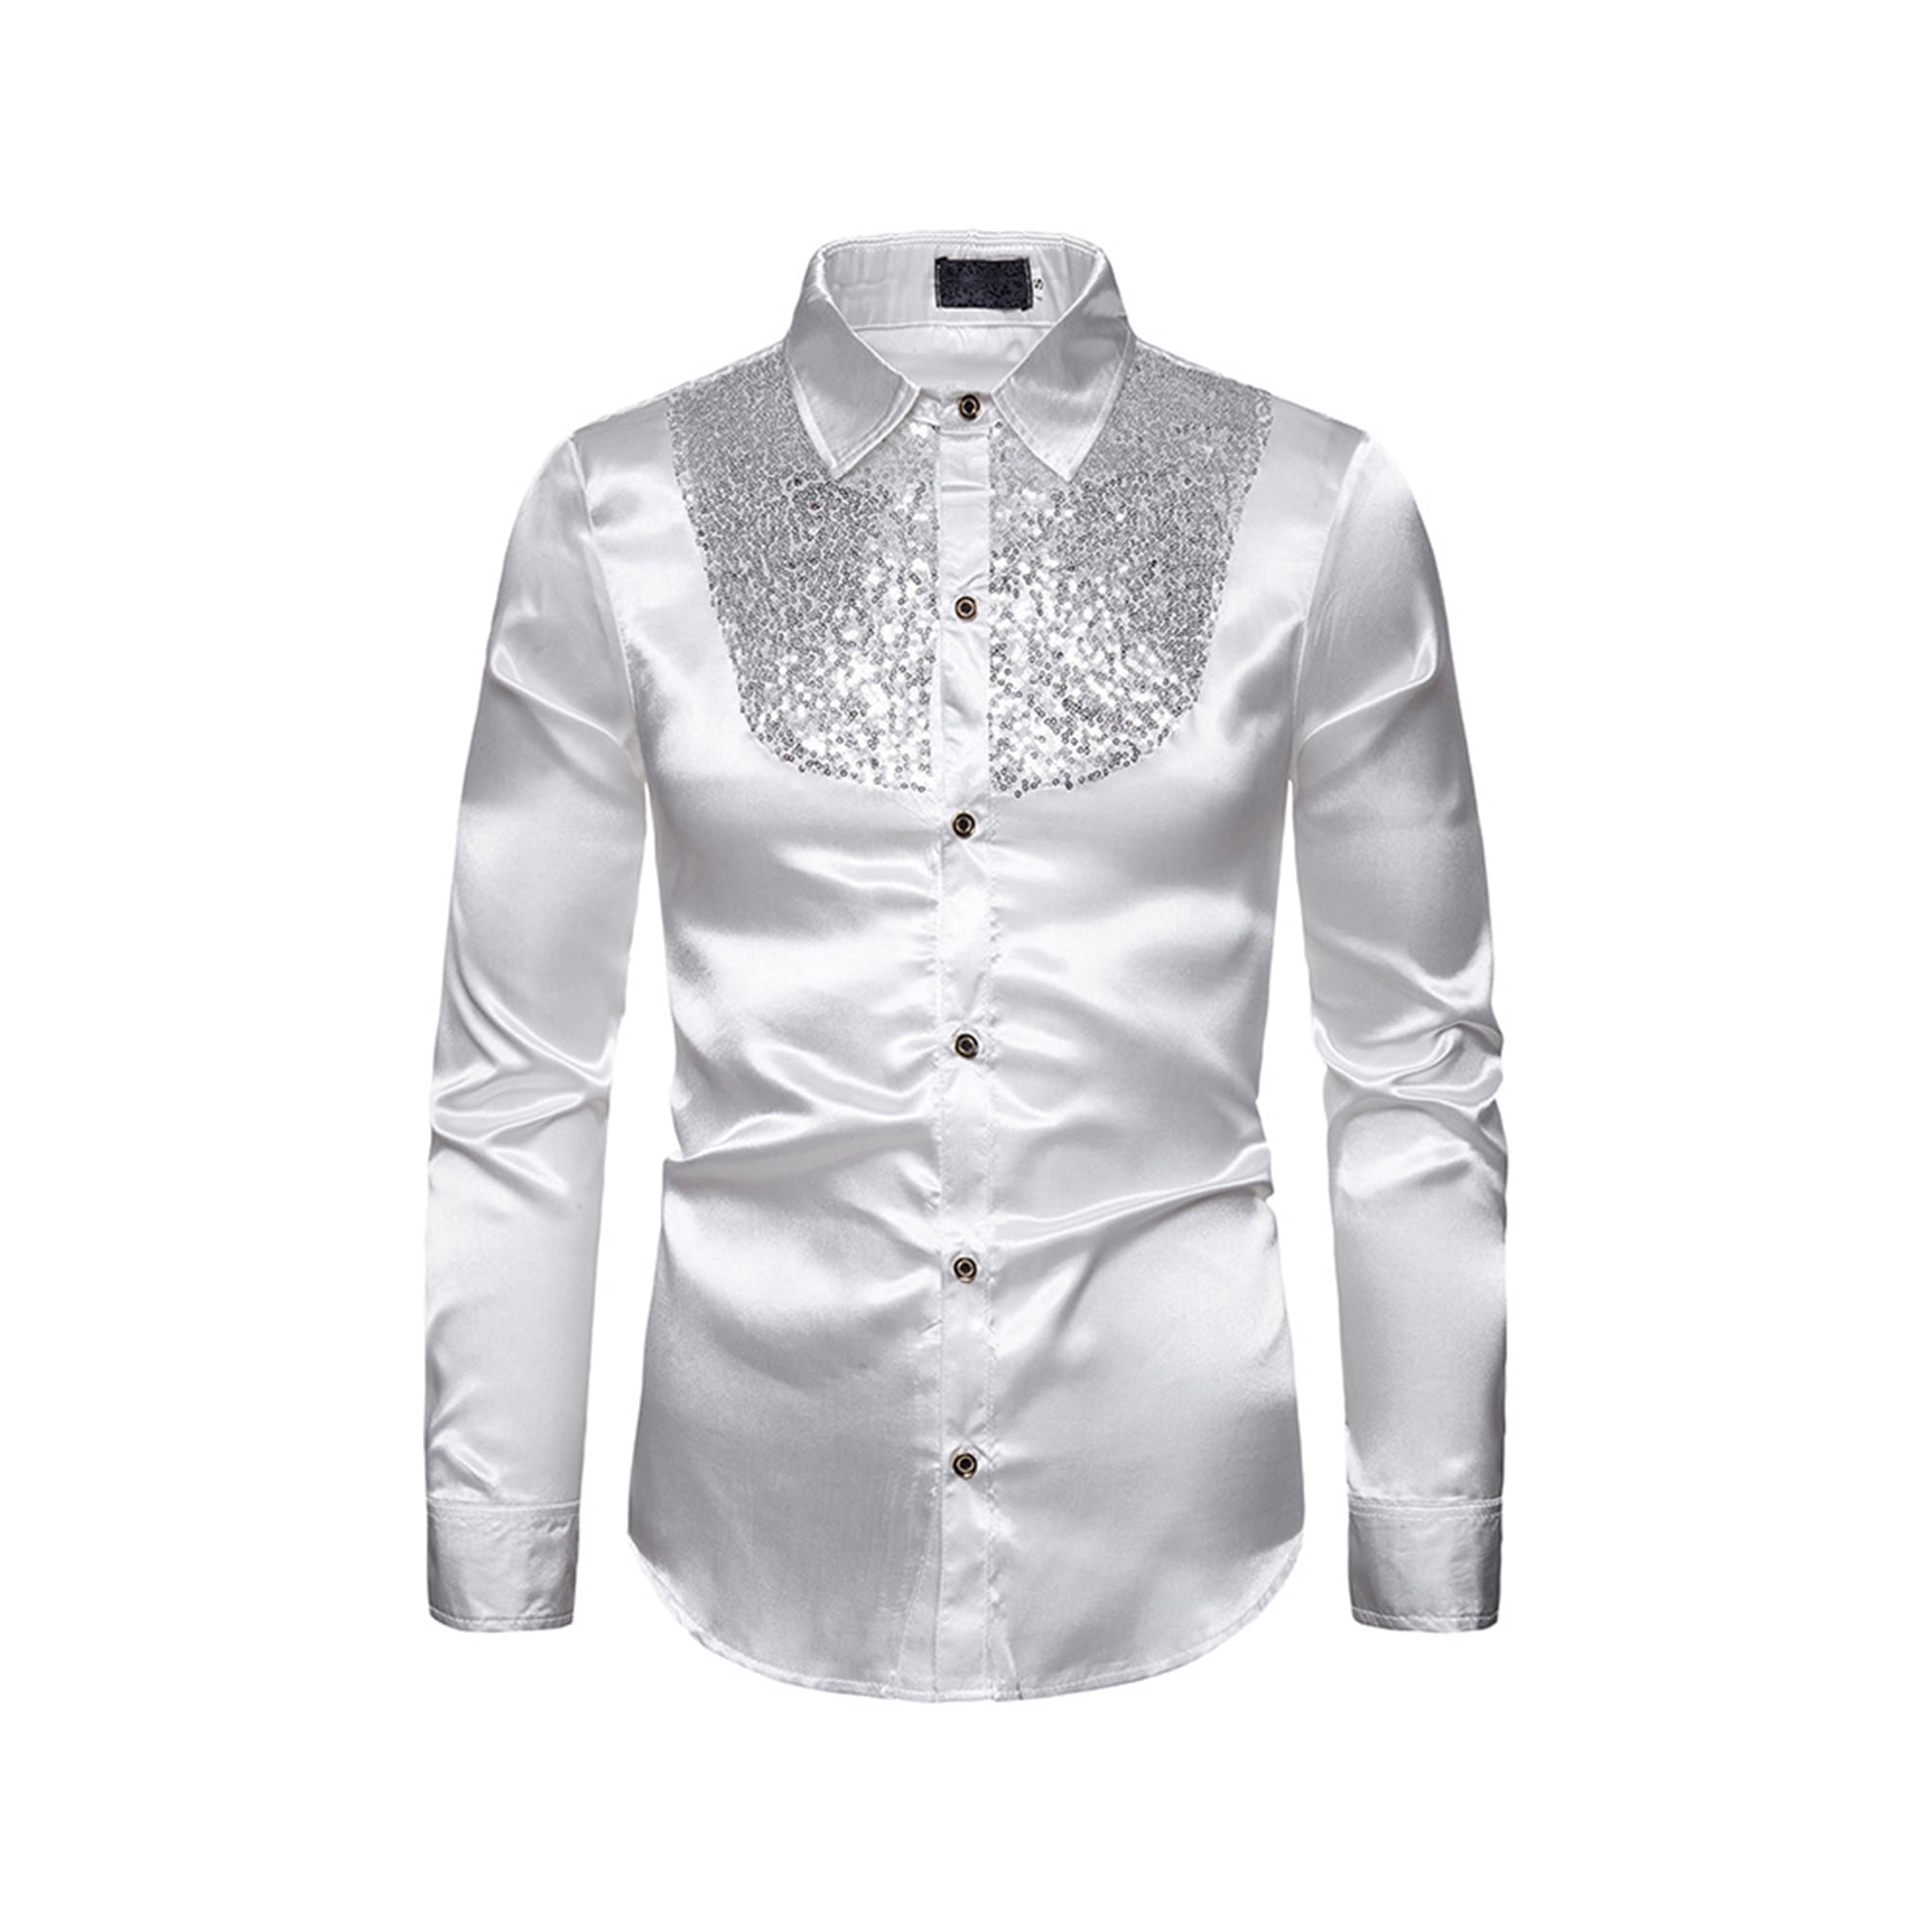 Men's Classic White Dress Shirt With Fold Down Collar